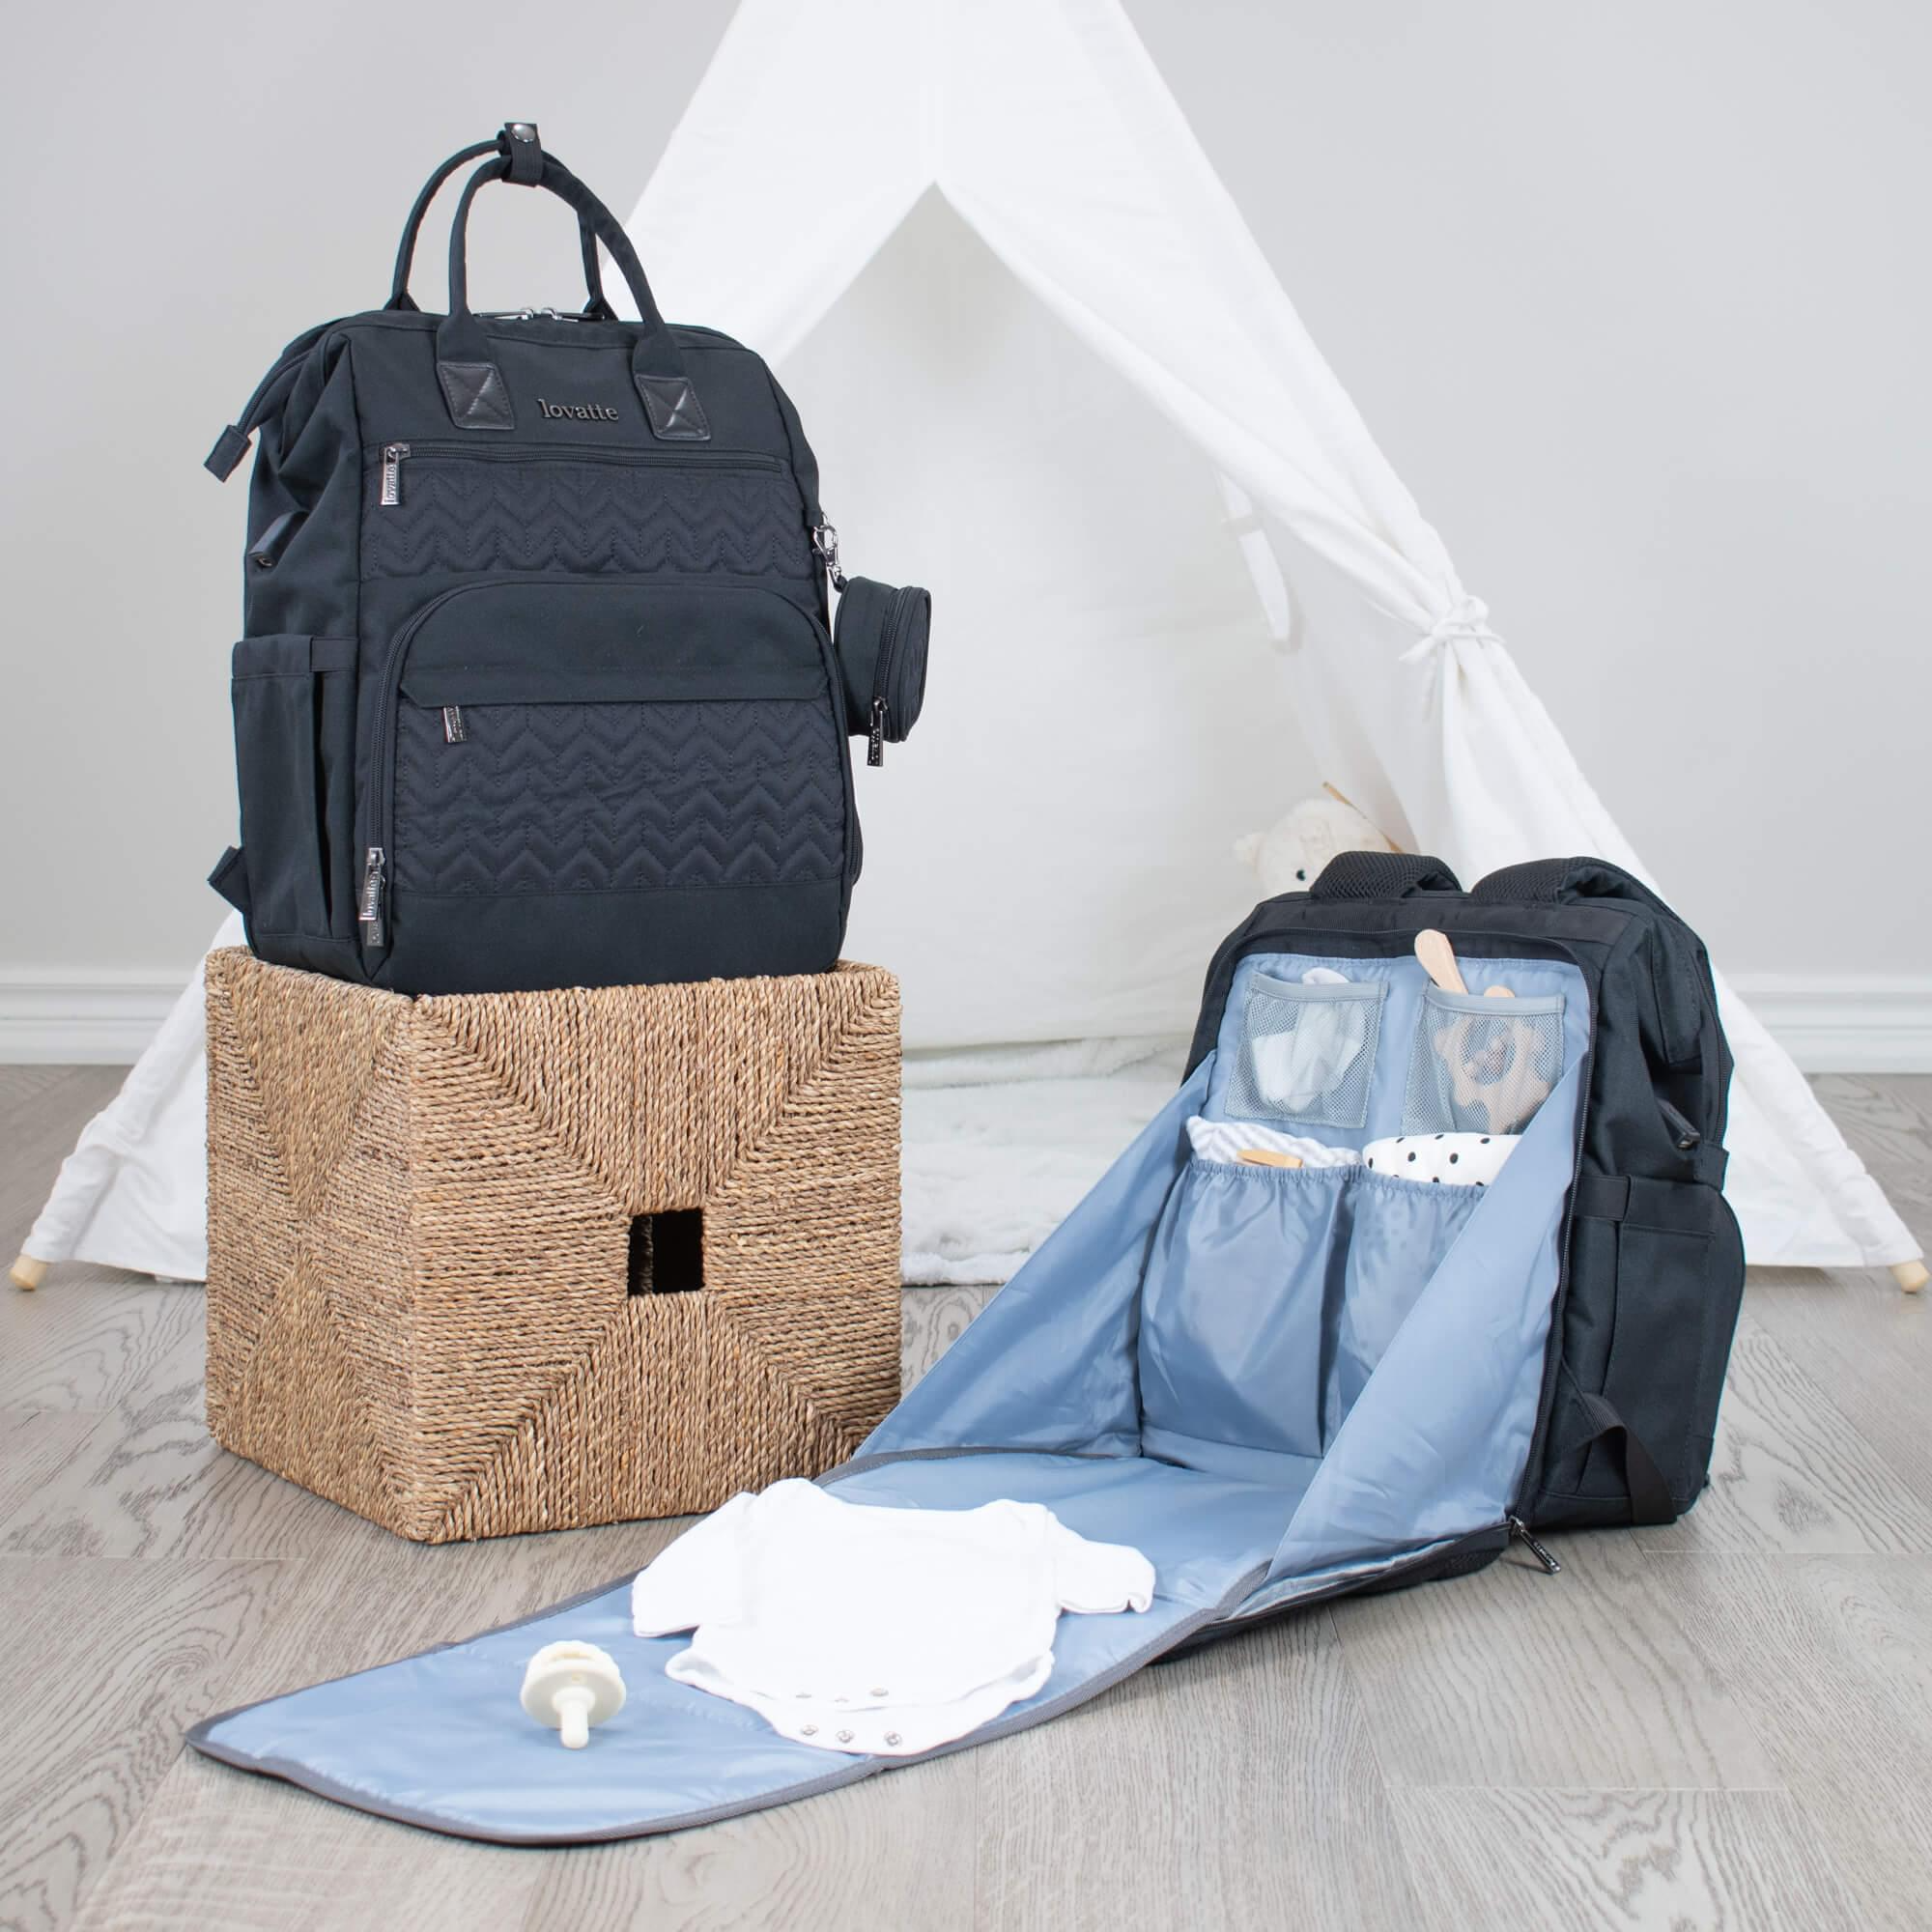 On-The-Go Parenting: The Backpack Diaper Bag Expedition